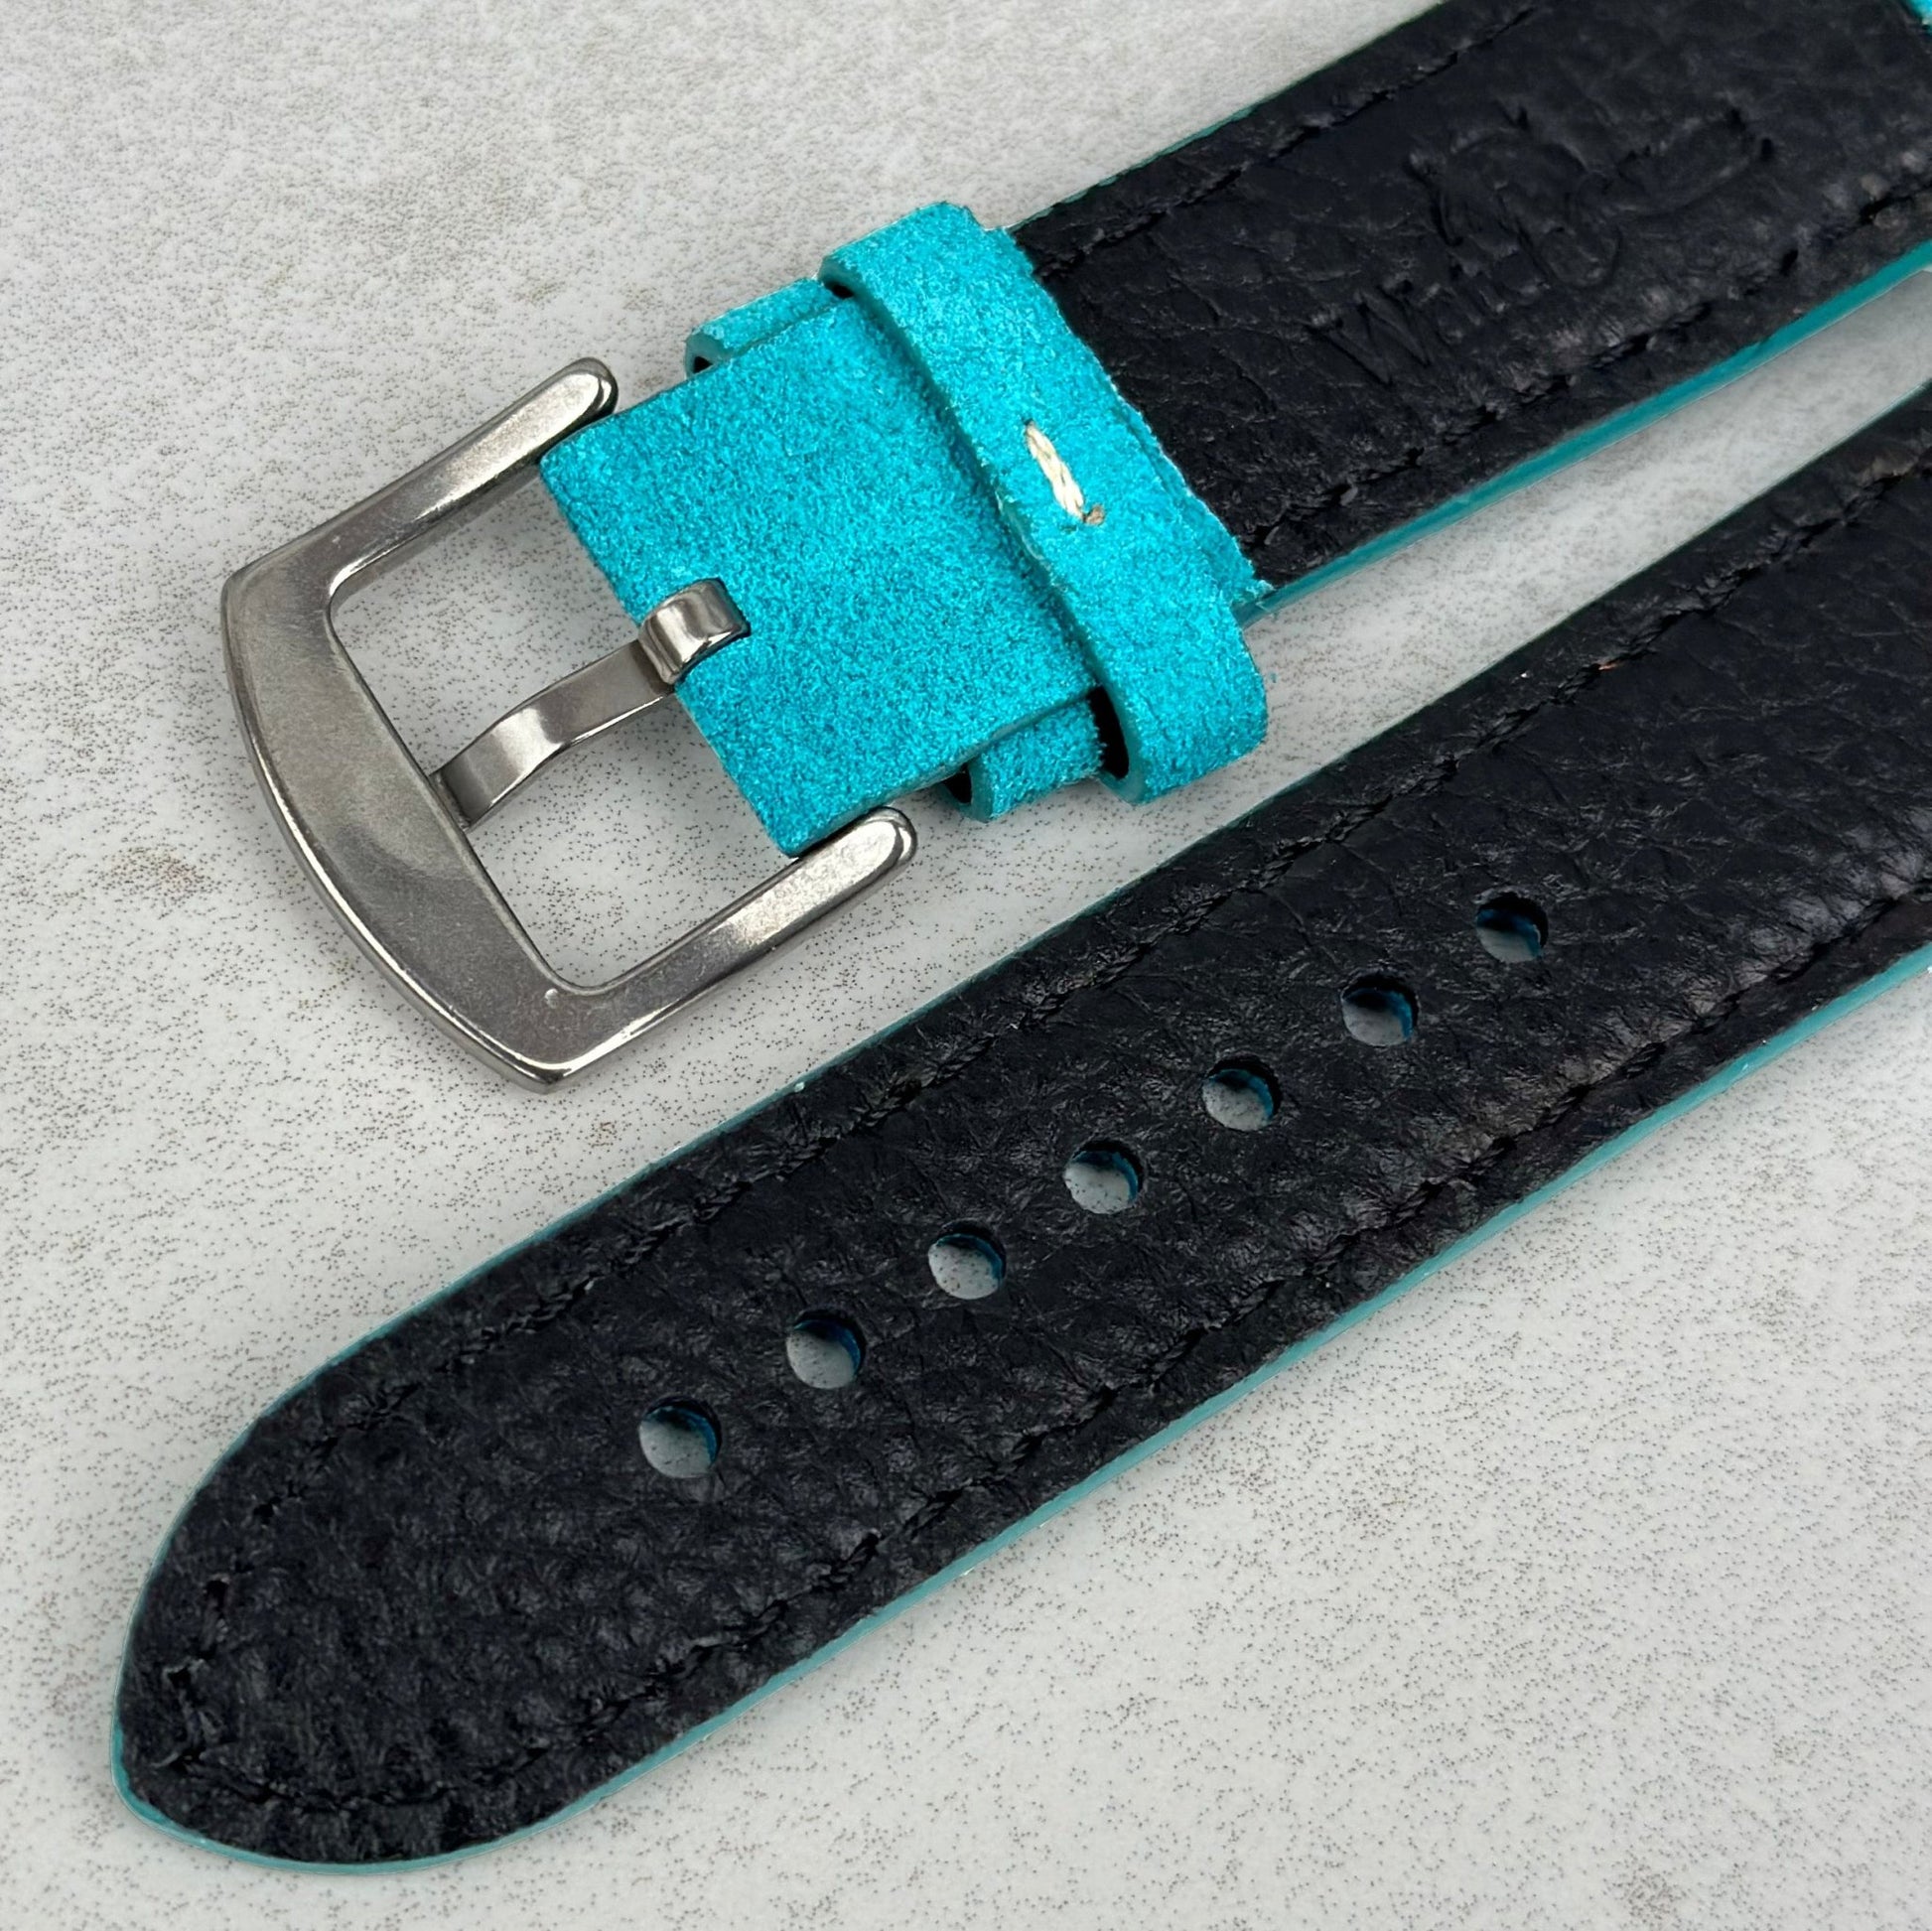 Underside of the Paris turquoise suede watch strap. Watch And Strap.